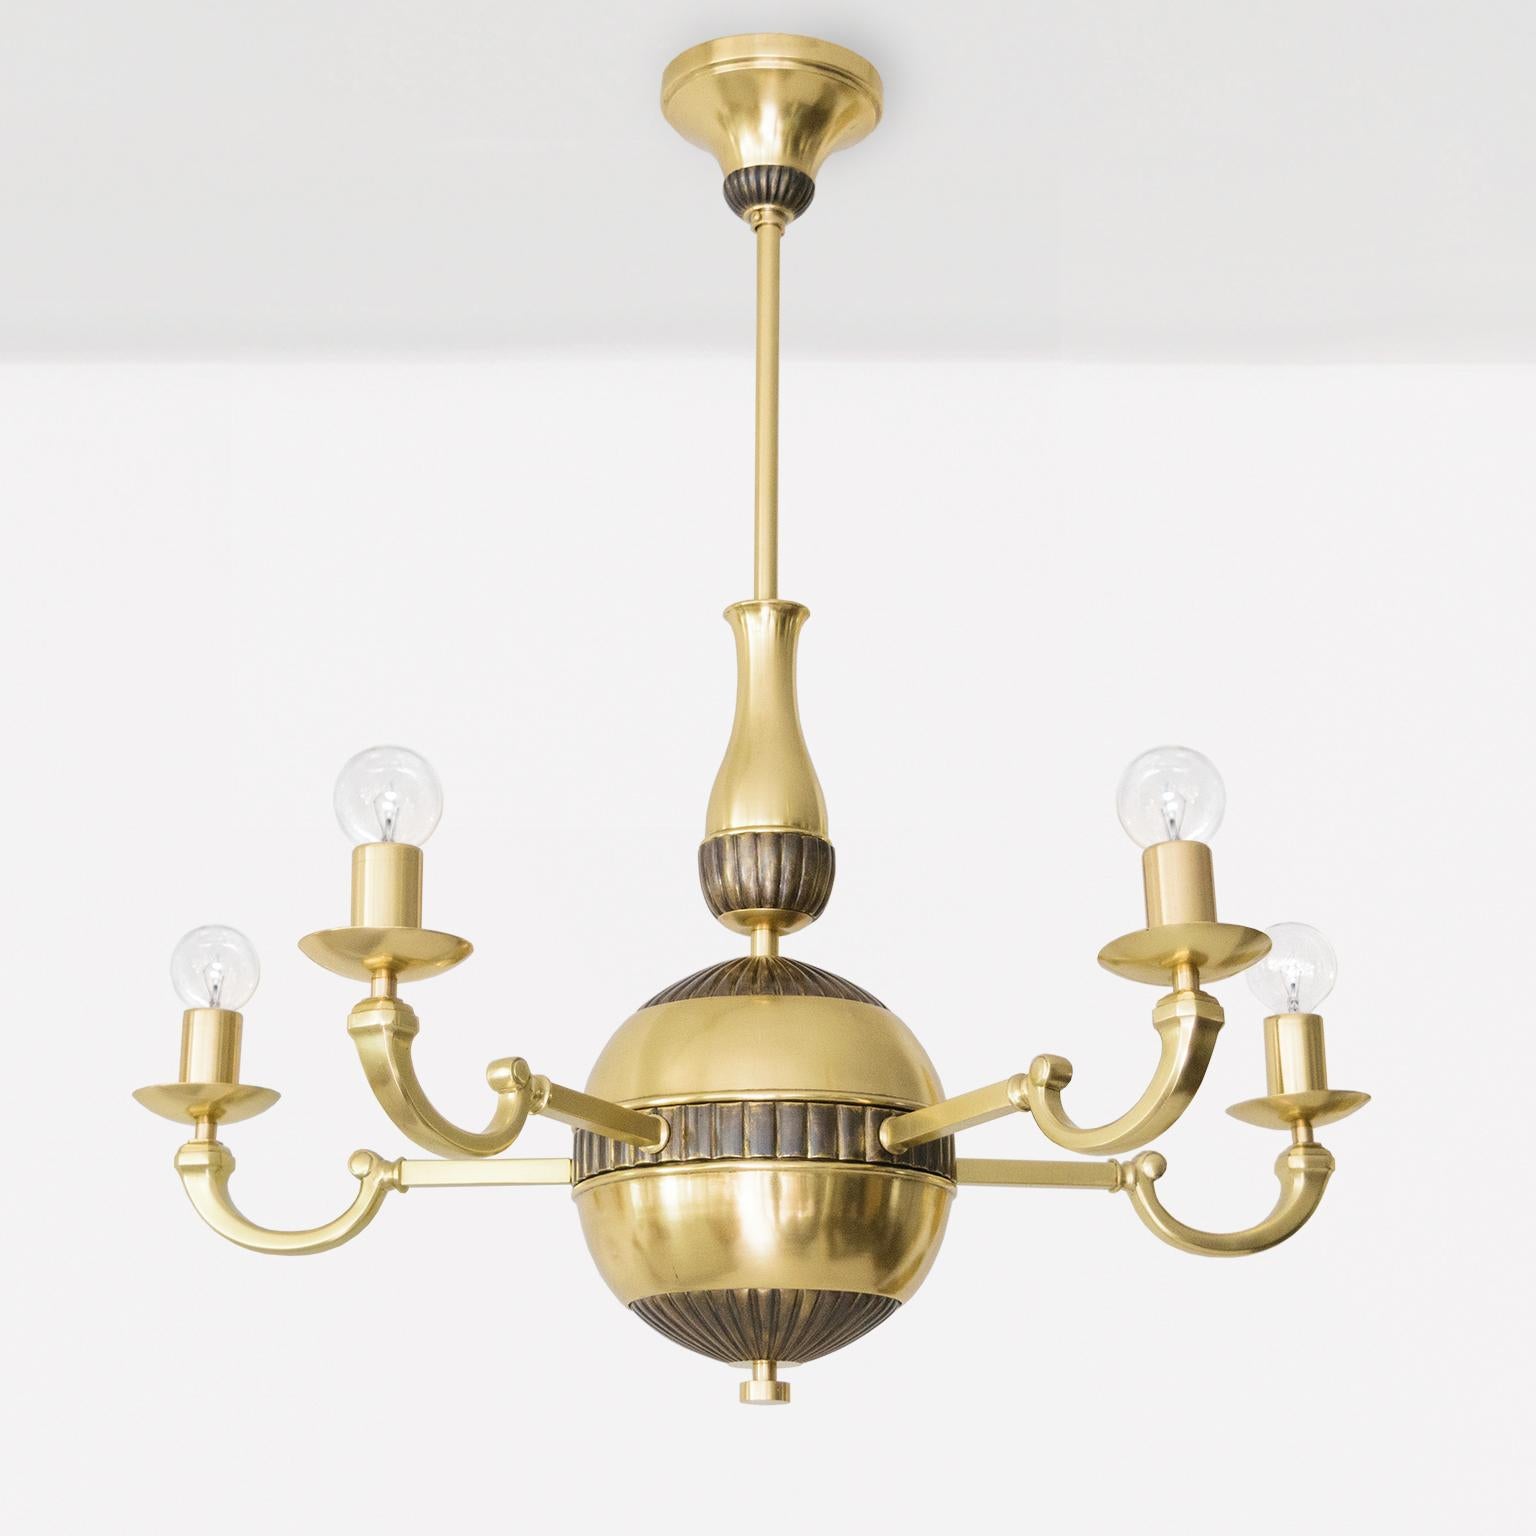 A Swedish Art Deco 5-arm chandelier in polished brass. This piece is finely detailed with raise surface elements which are lightly patinated. The chandelier bridges modernism with classical design elements. Fully restored, polished, lacquered and